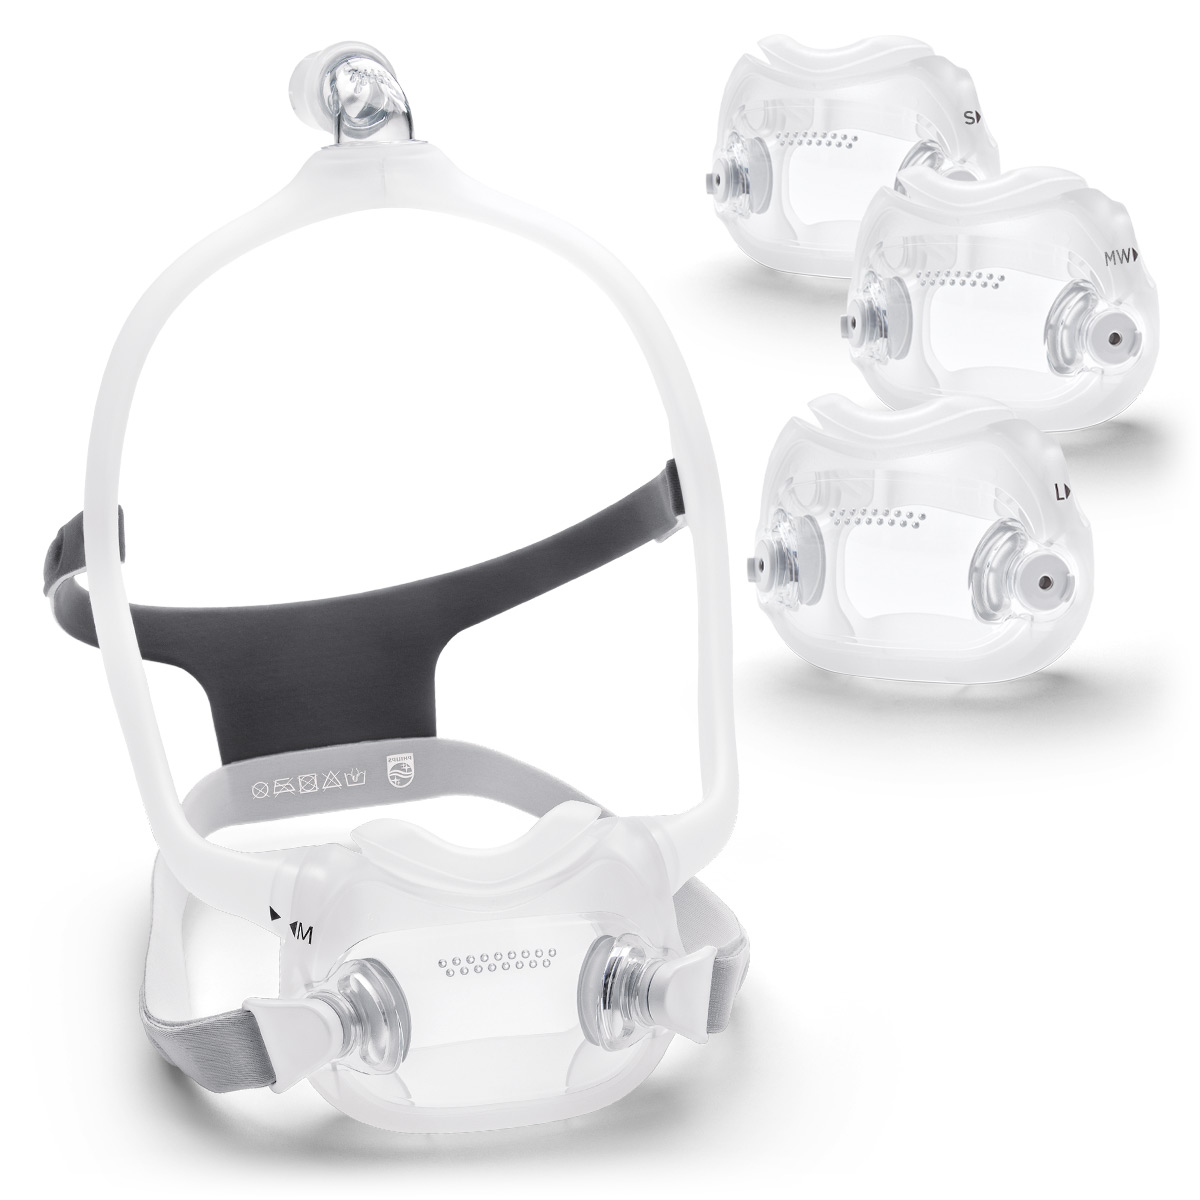 Philips Respironics Dreamwear Full Face Cpap Mask Fitpack 30 Night Risk Free Trial Ships Free 